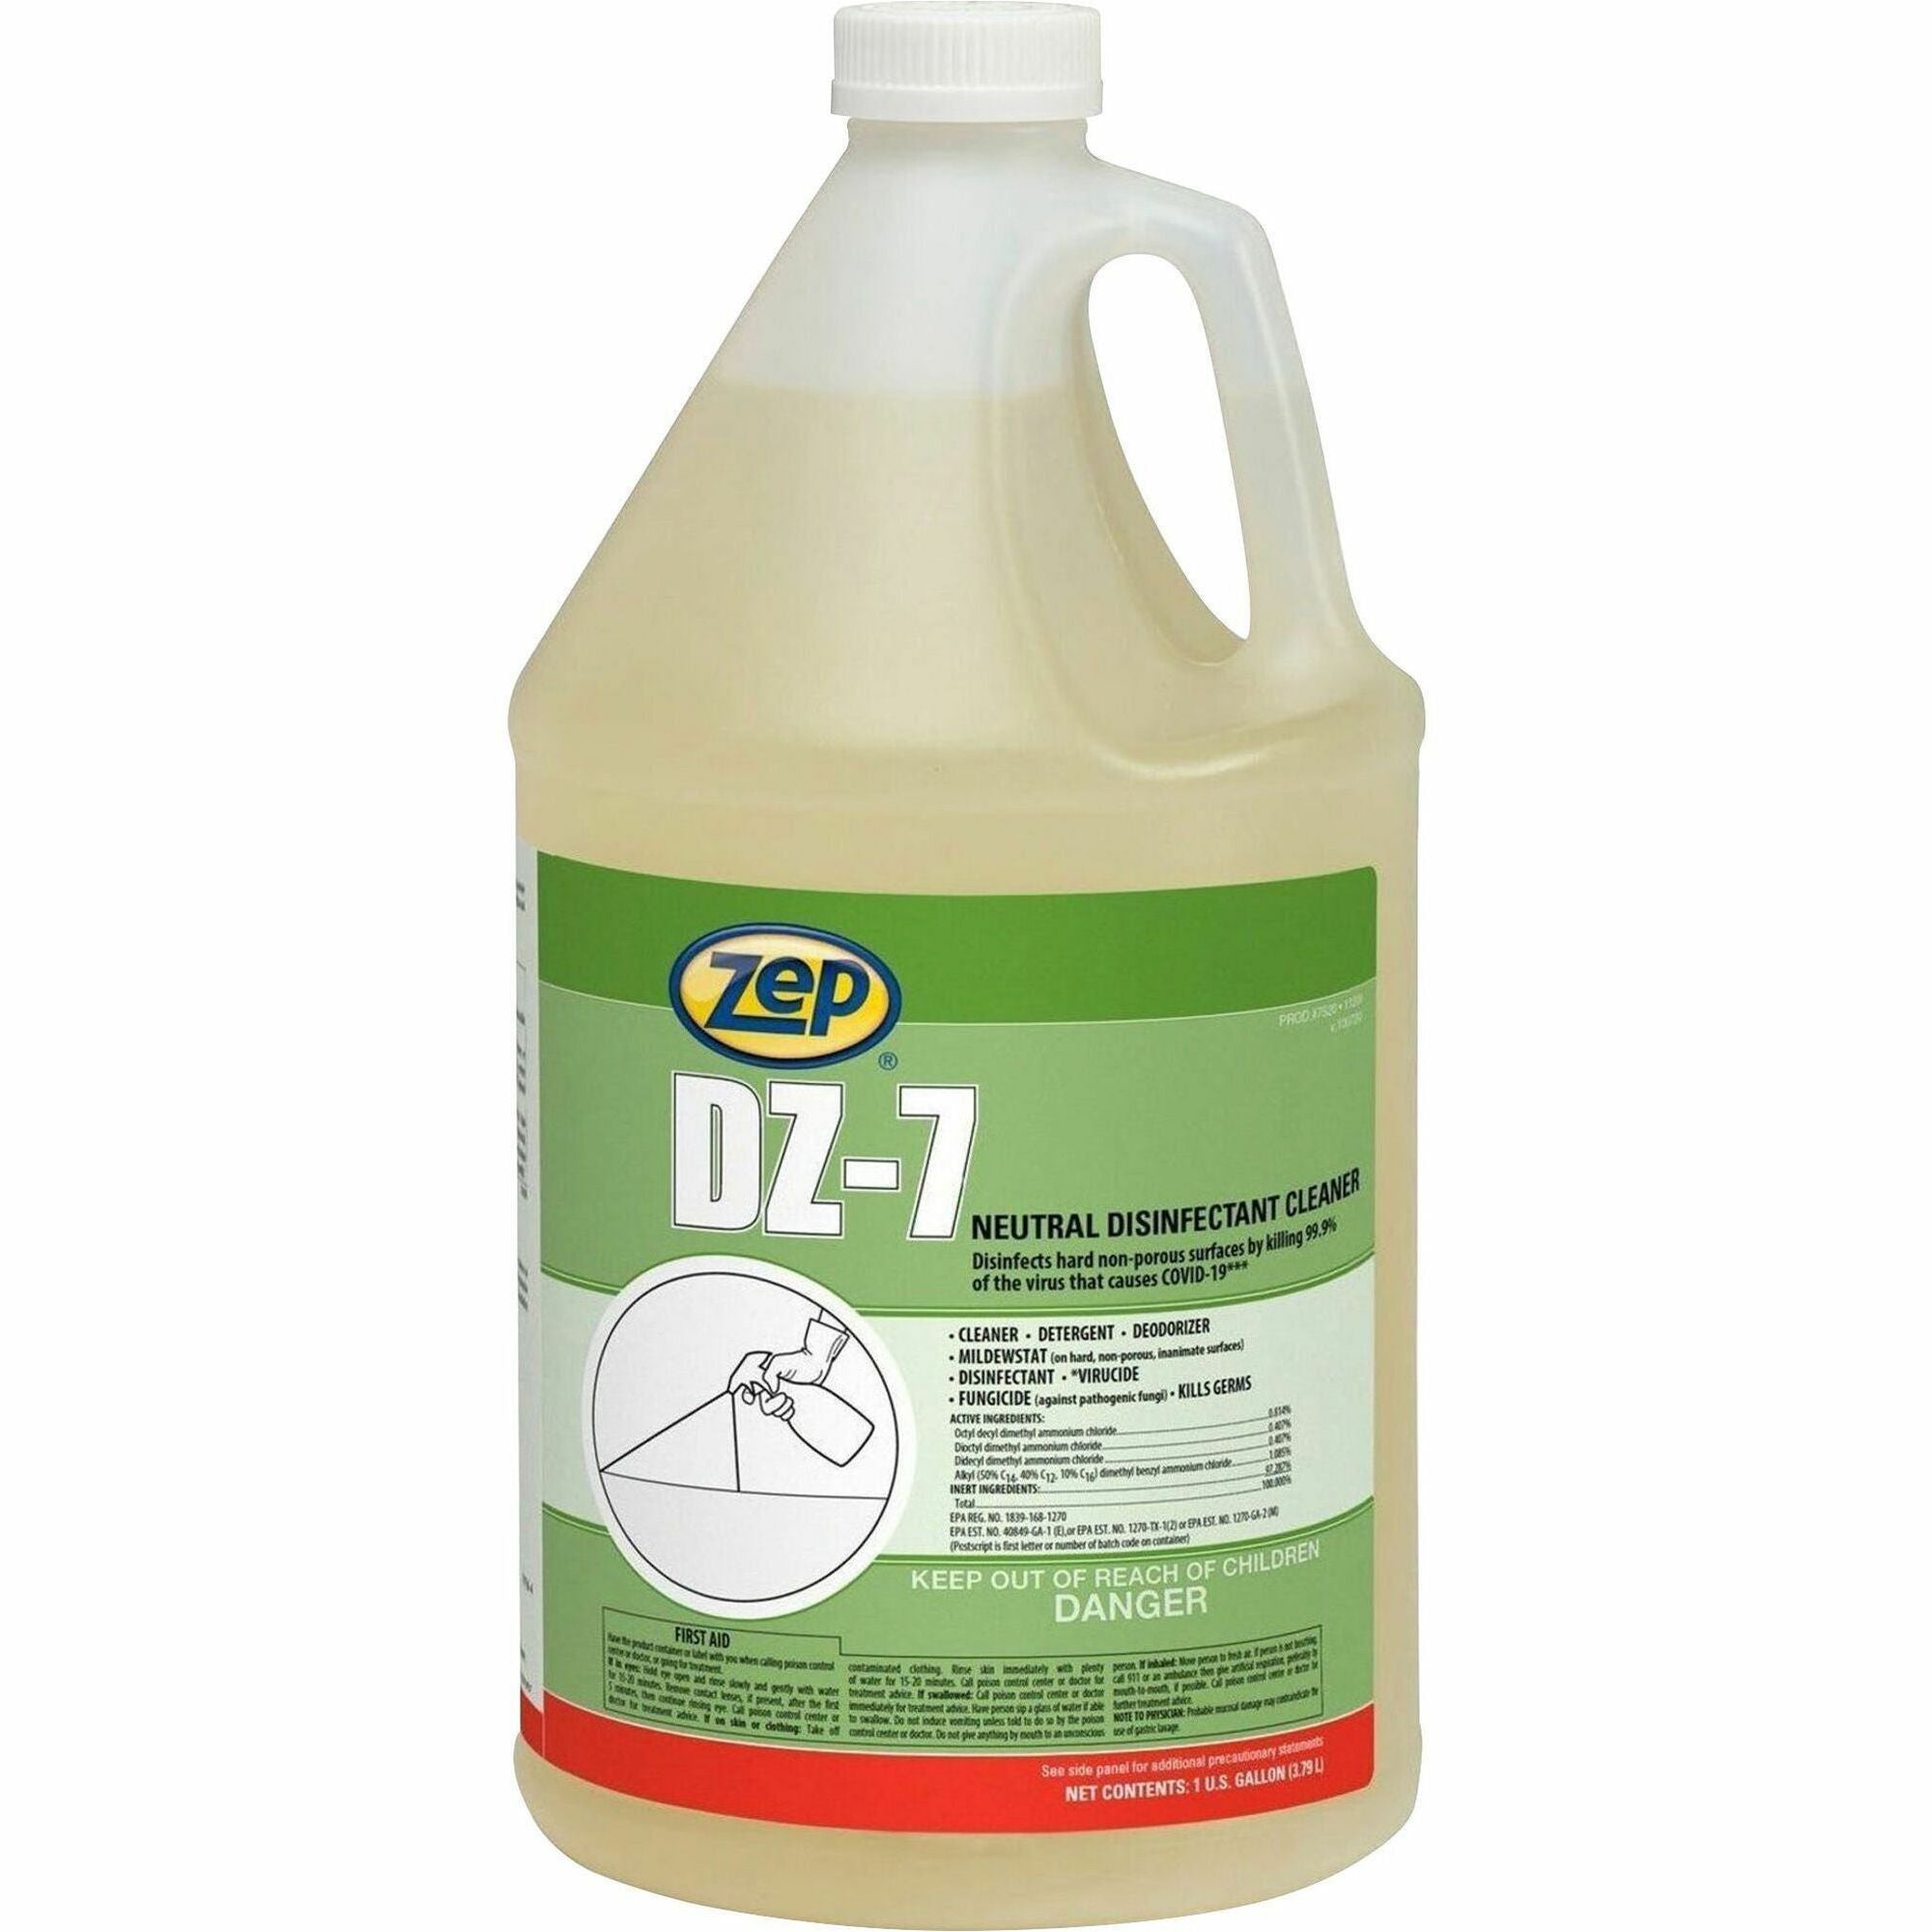 Zep Commercial DZ-7 Neutral Disinfectant Cleaner - 128 fl oz (4 quart) - Neutral Scent - 1 Each - Virucidal, Bactericide, Fungicide, Mildewstatic, pH Neutral, Phosphate-free, Butyl-free, APE-free - Yellow - 1